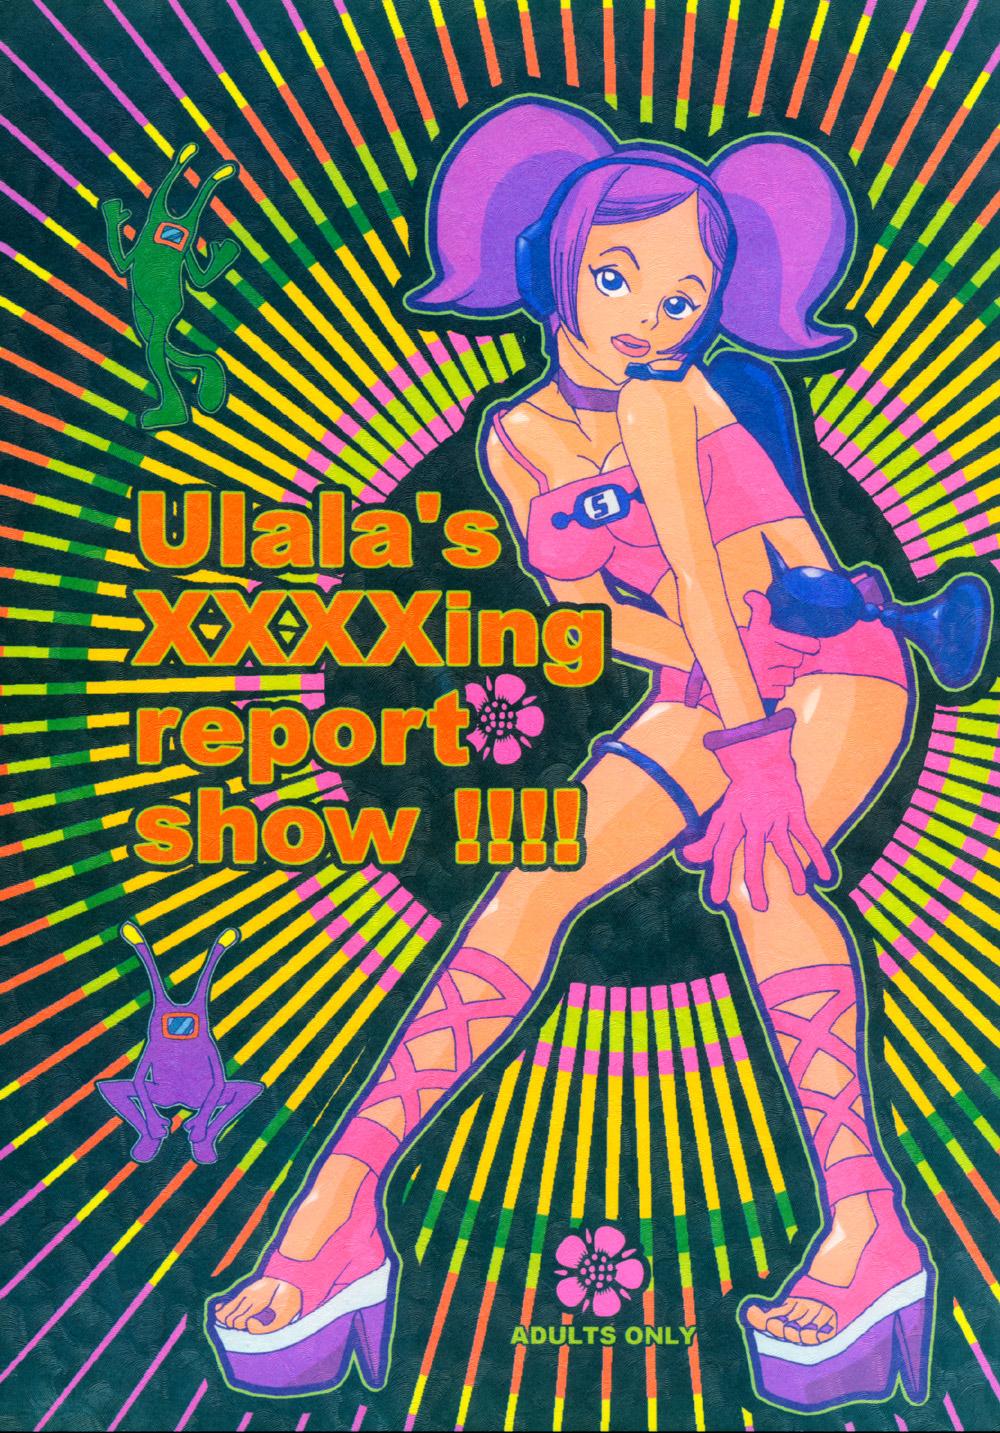  Ulala's XXXXing Report Show!!!! - Space channel 5 Free Amateur - Page 1